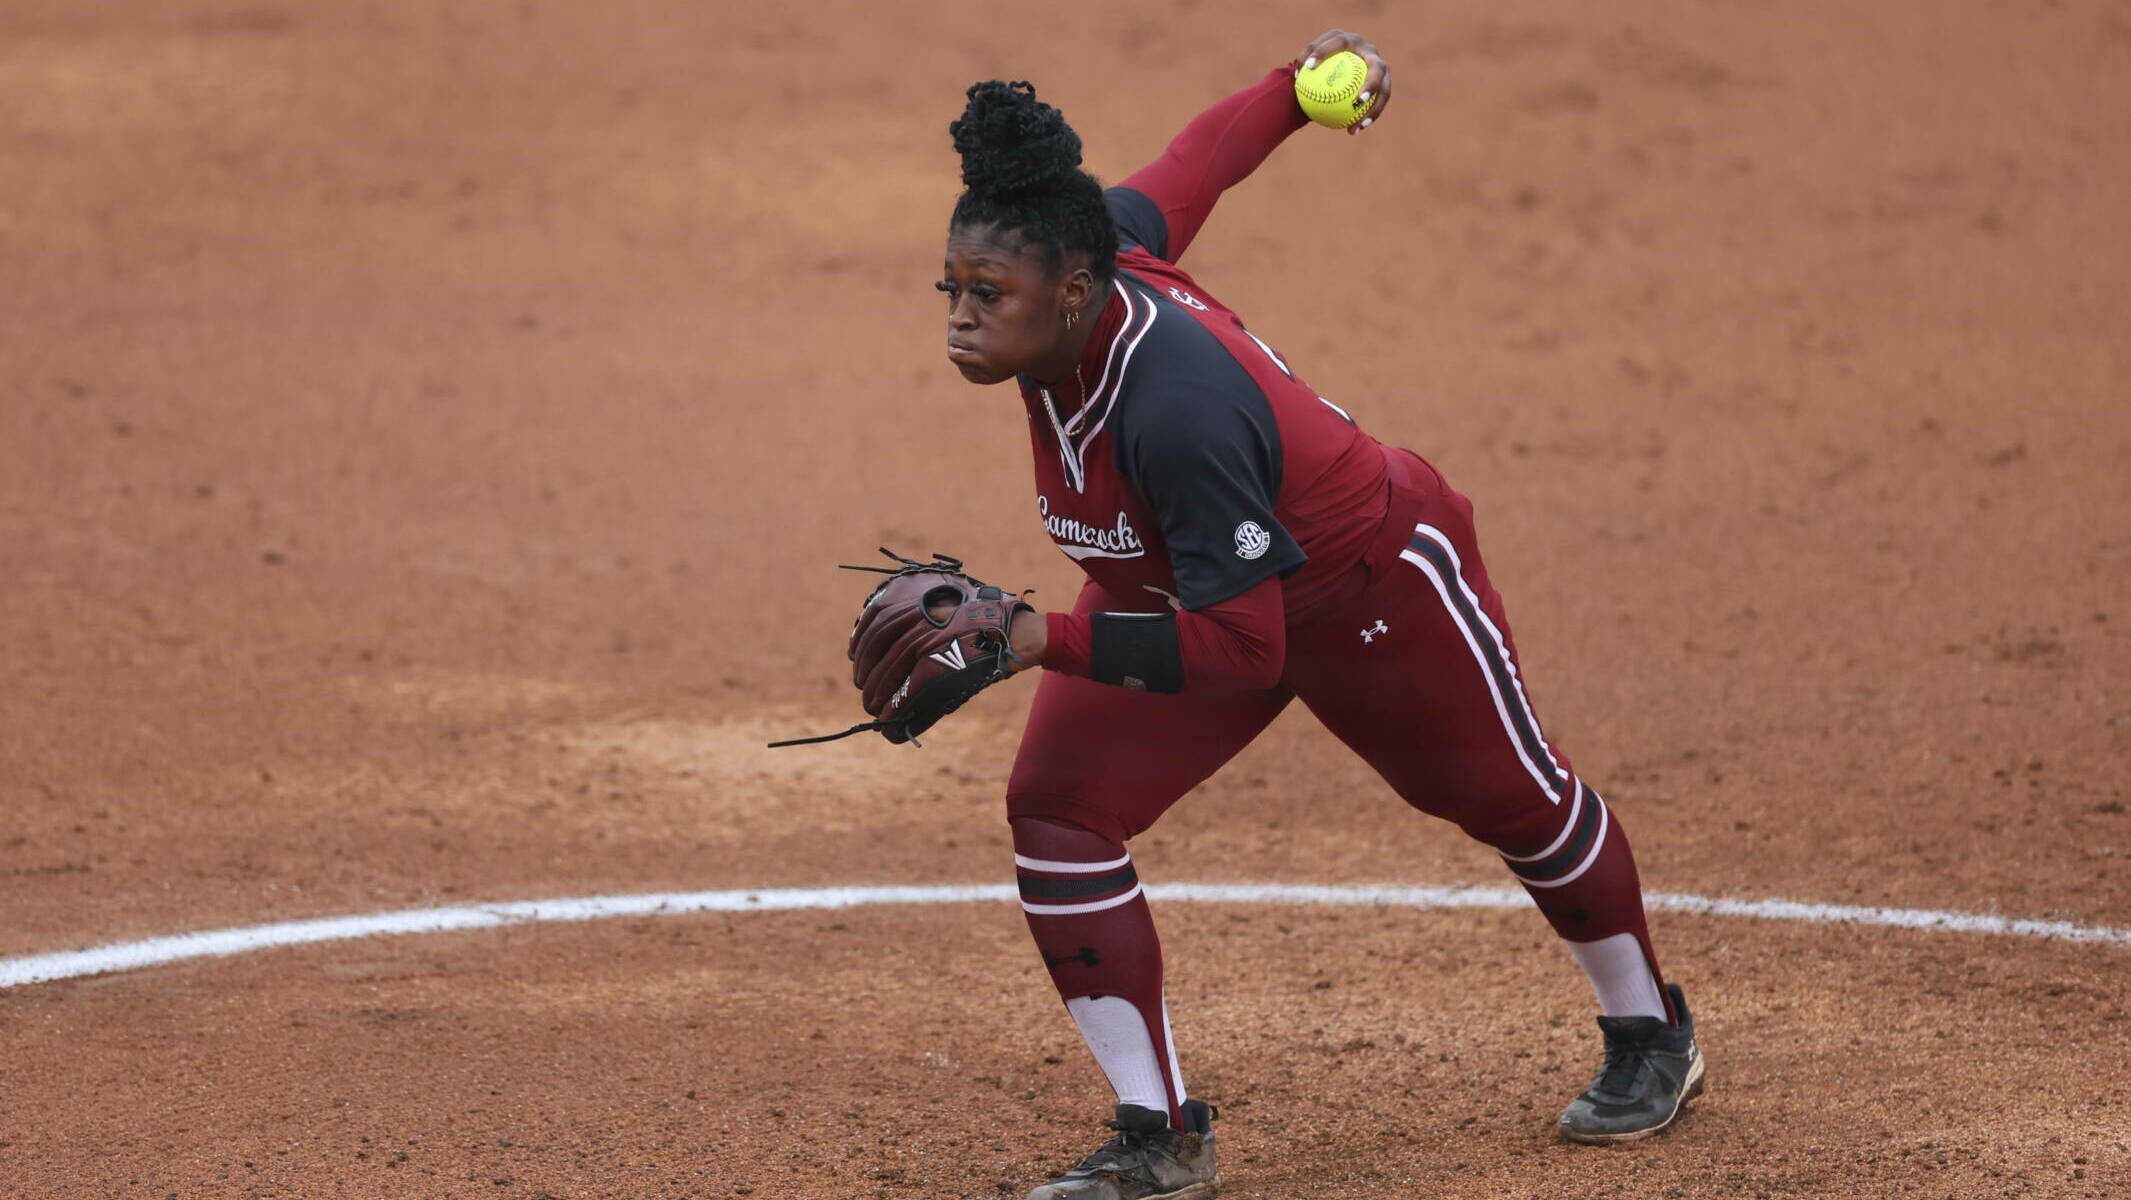 Gobourne Strikes out 11, Gamecocks Split Doubleheader with No. 16 Alabama